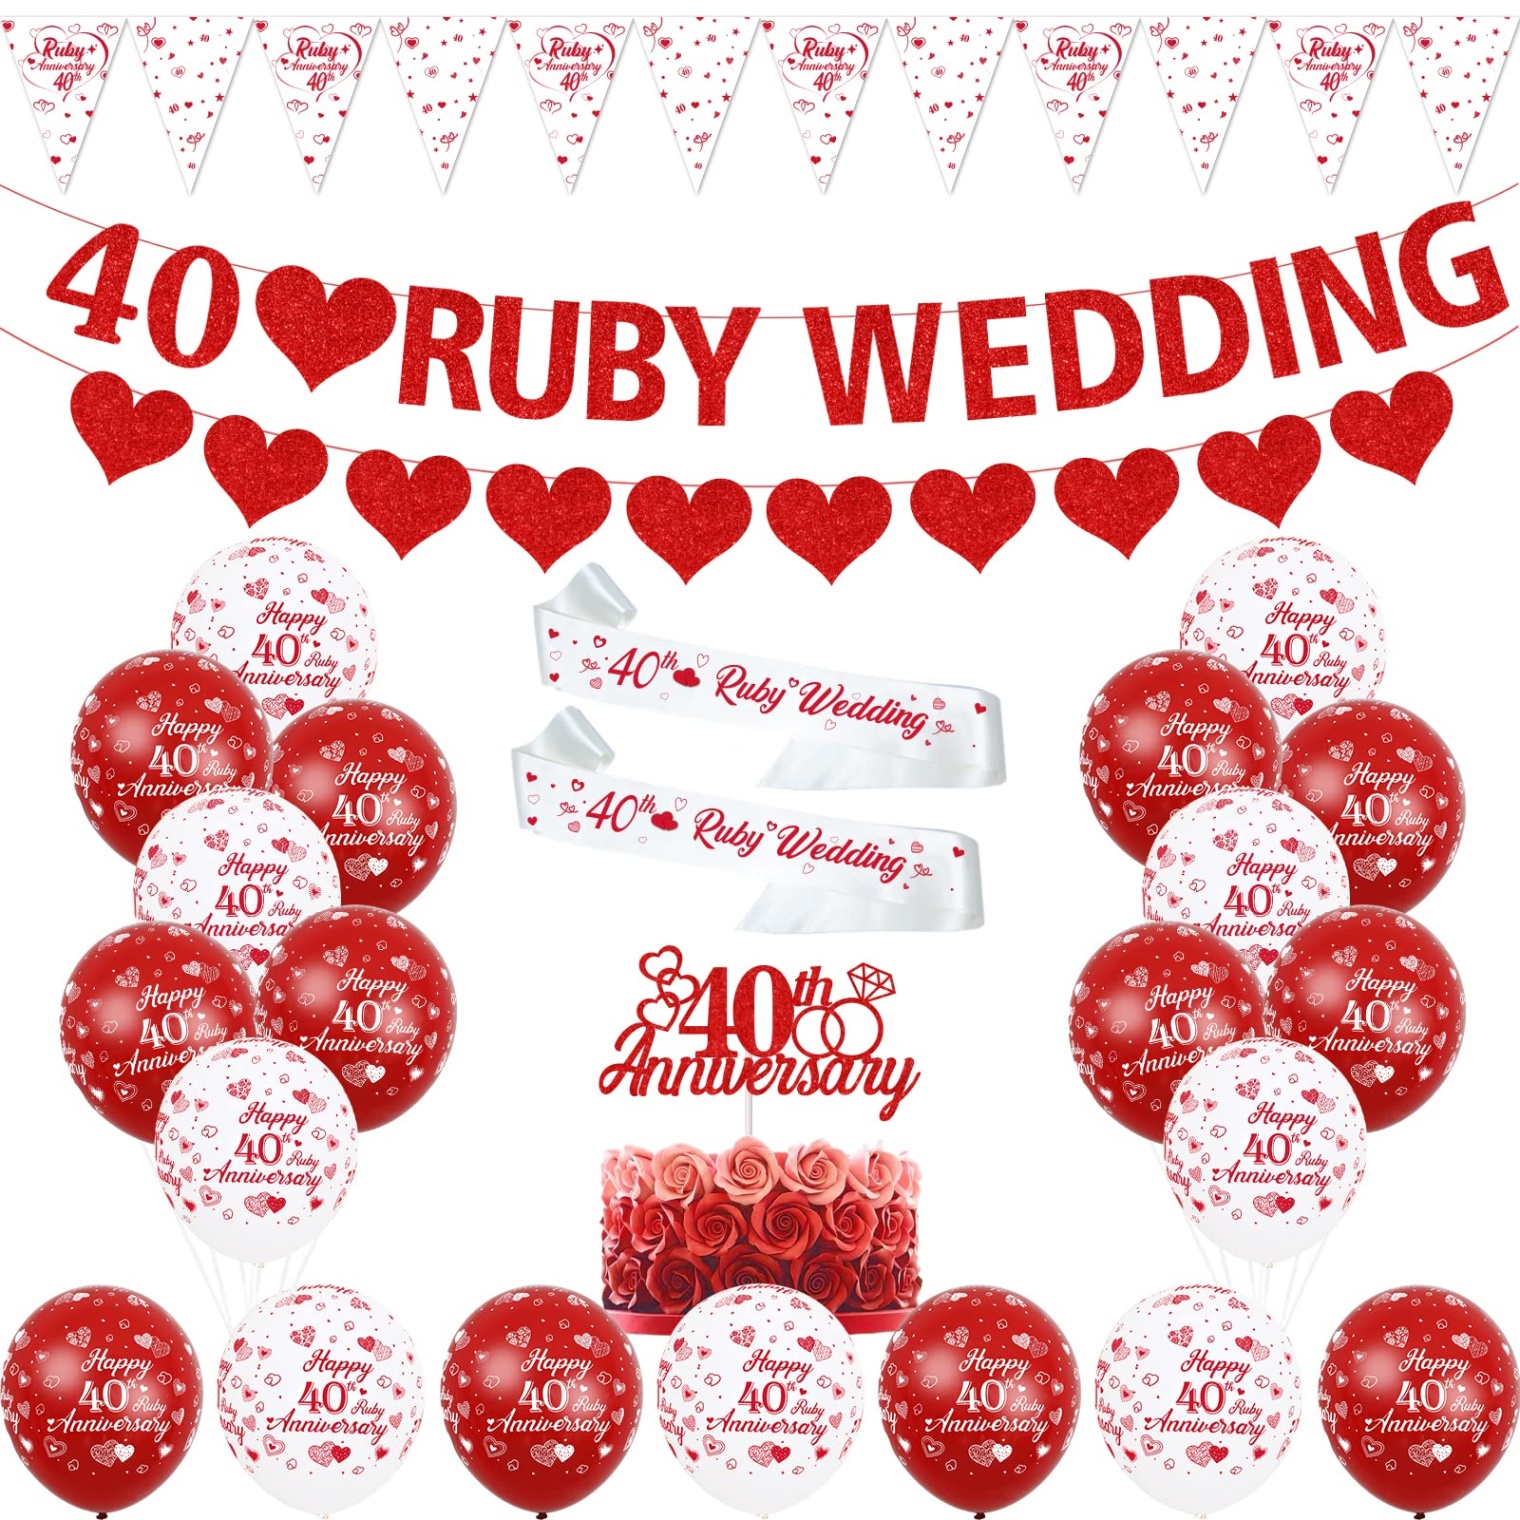 40th wedding anniversary decorations Bulan 1 th Wedding Anniversary Decorations Ruby th Anniversary Balloons Bunting  Red Heart Rings Cake Topper Satin Sash for th Couple Anniversary Party